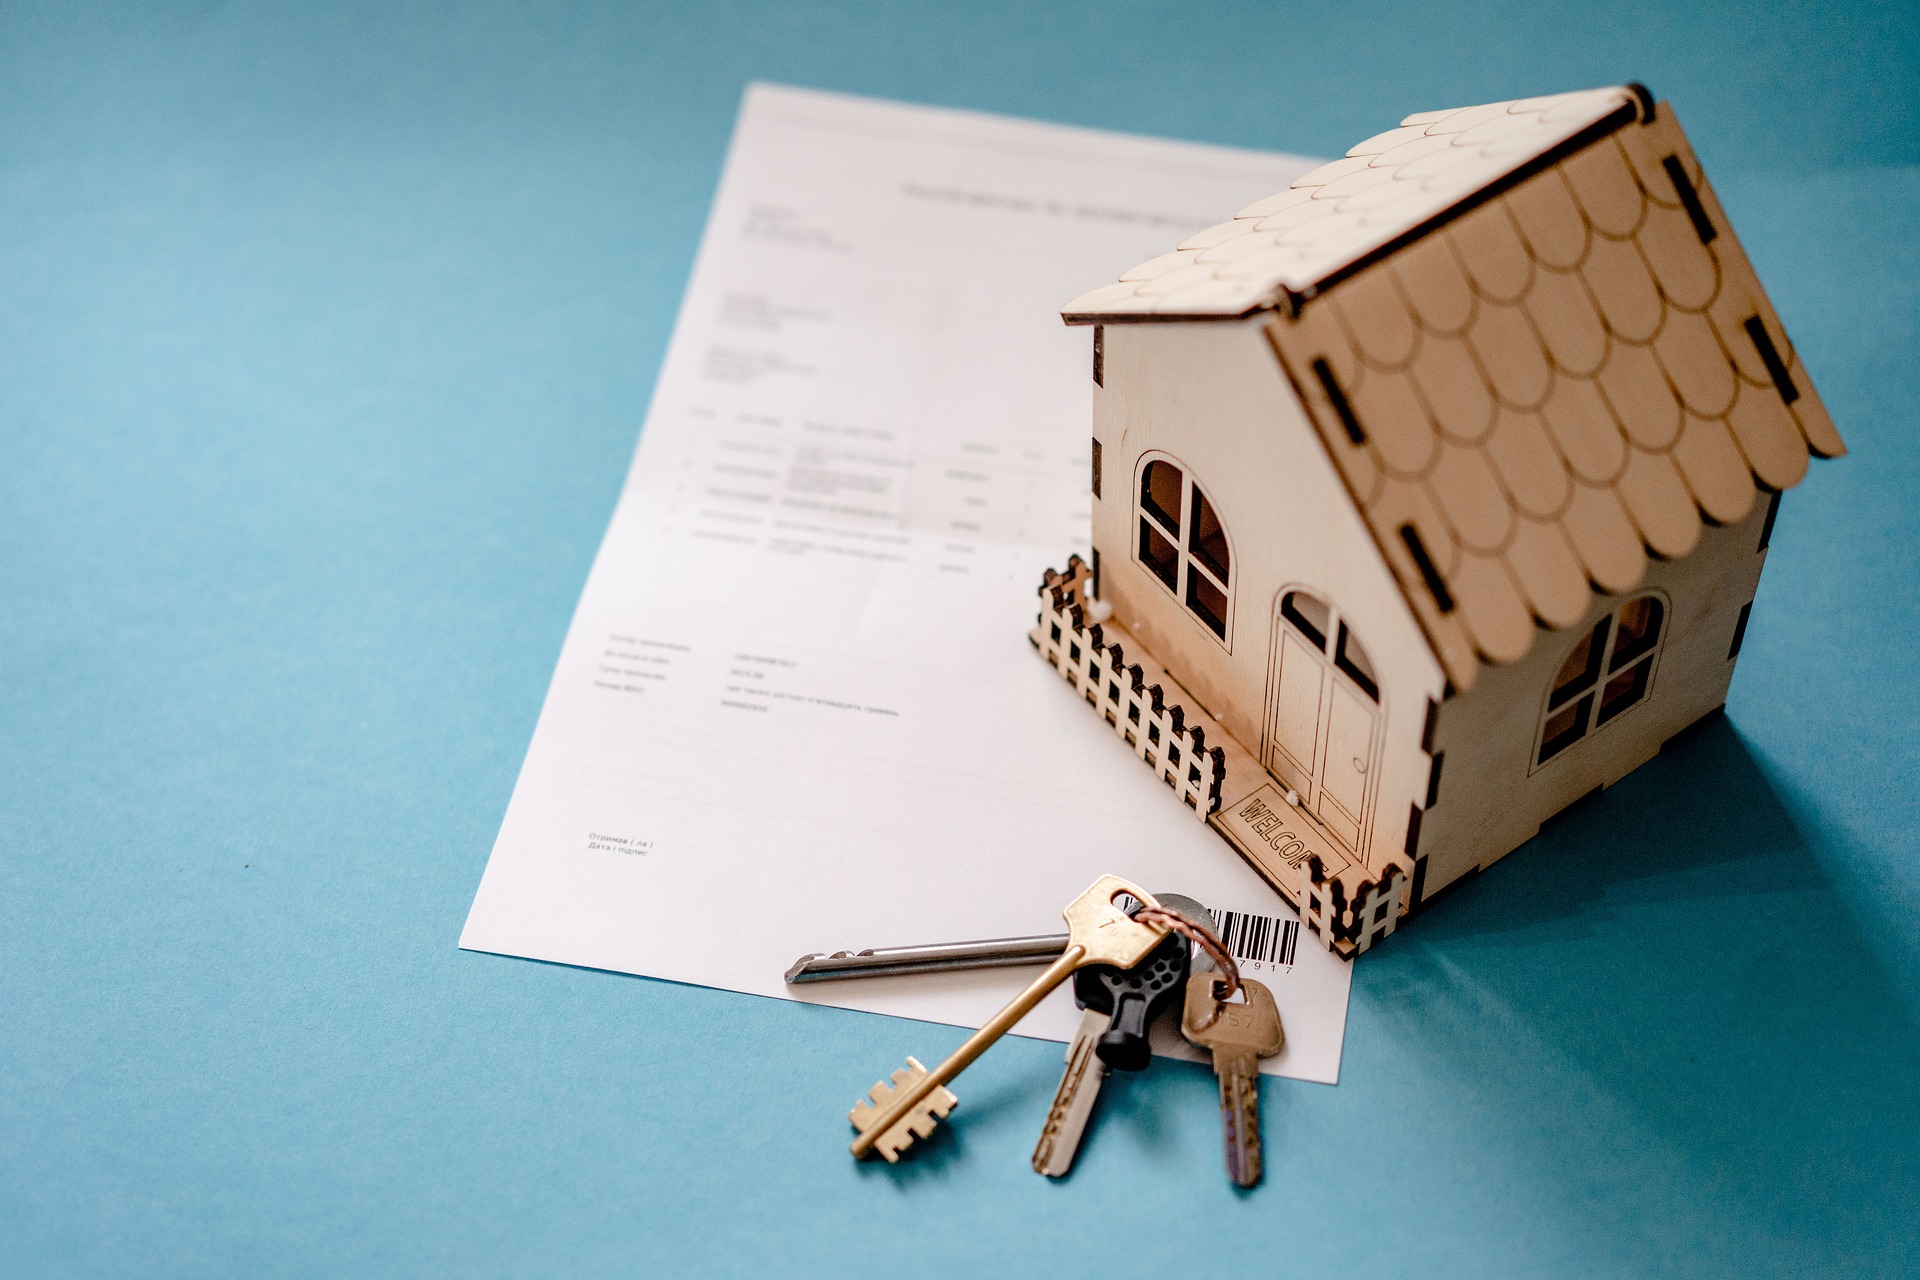 Header image for blog titled: Understanding conveyancing searches. Showing an image of a model house made out of wood with a set of keys and legal paperwork next to it.